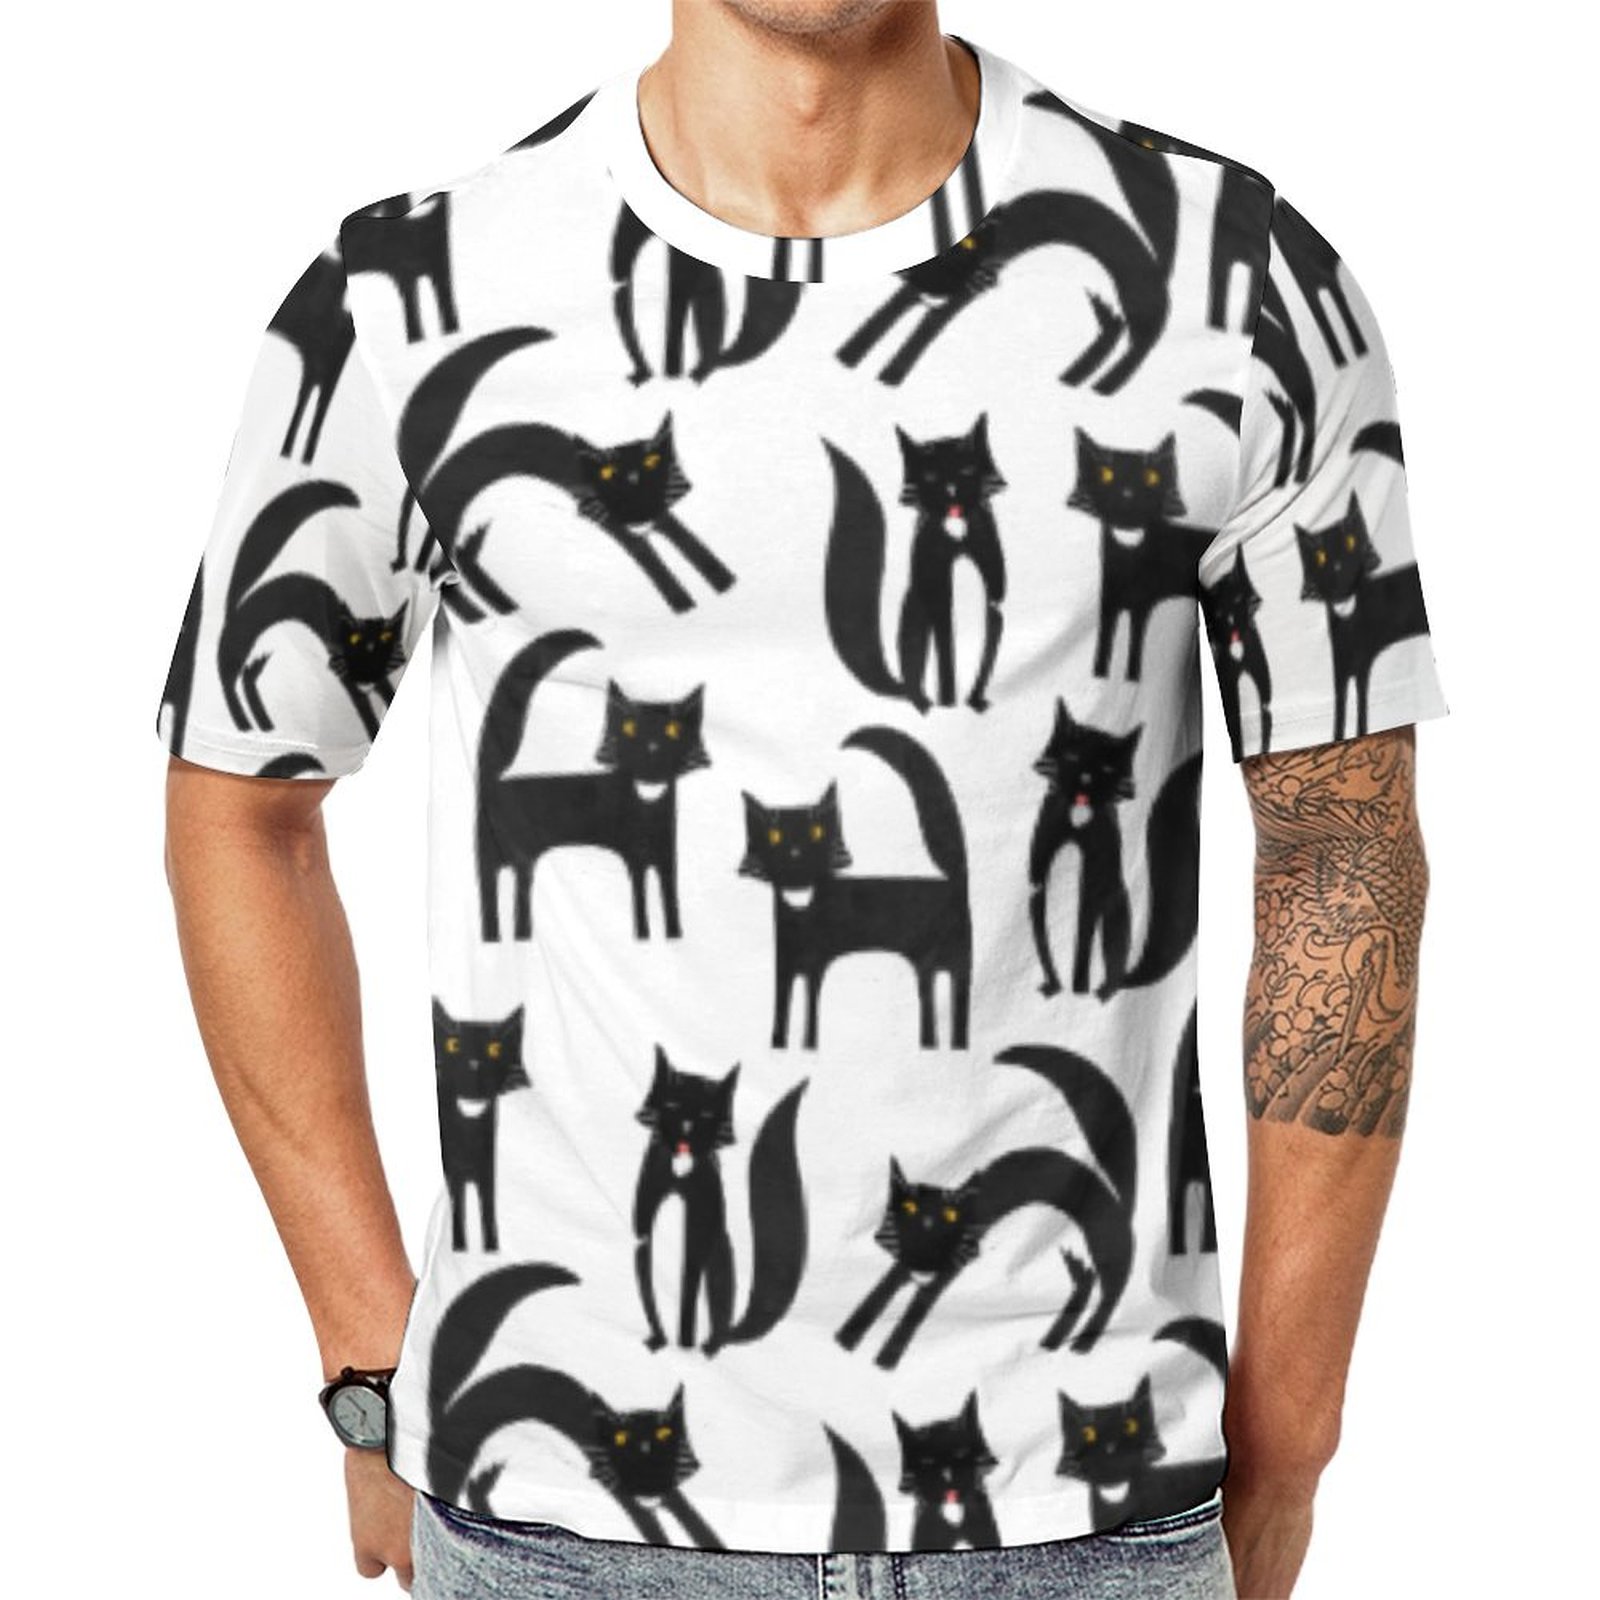 Black And White Tuxedo Cat Short Sleeve Print Unisex Tshirt Summer Casual Tees for Men and Women Coolcoshirts